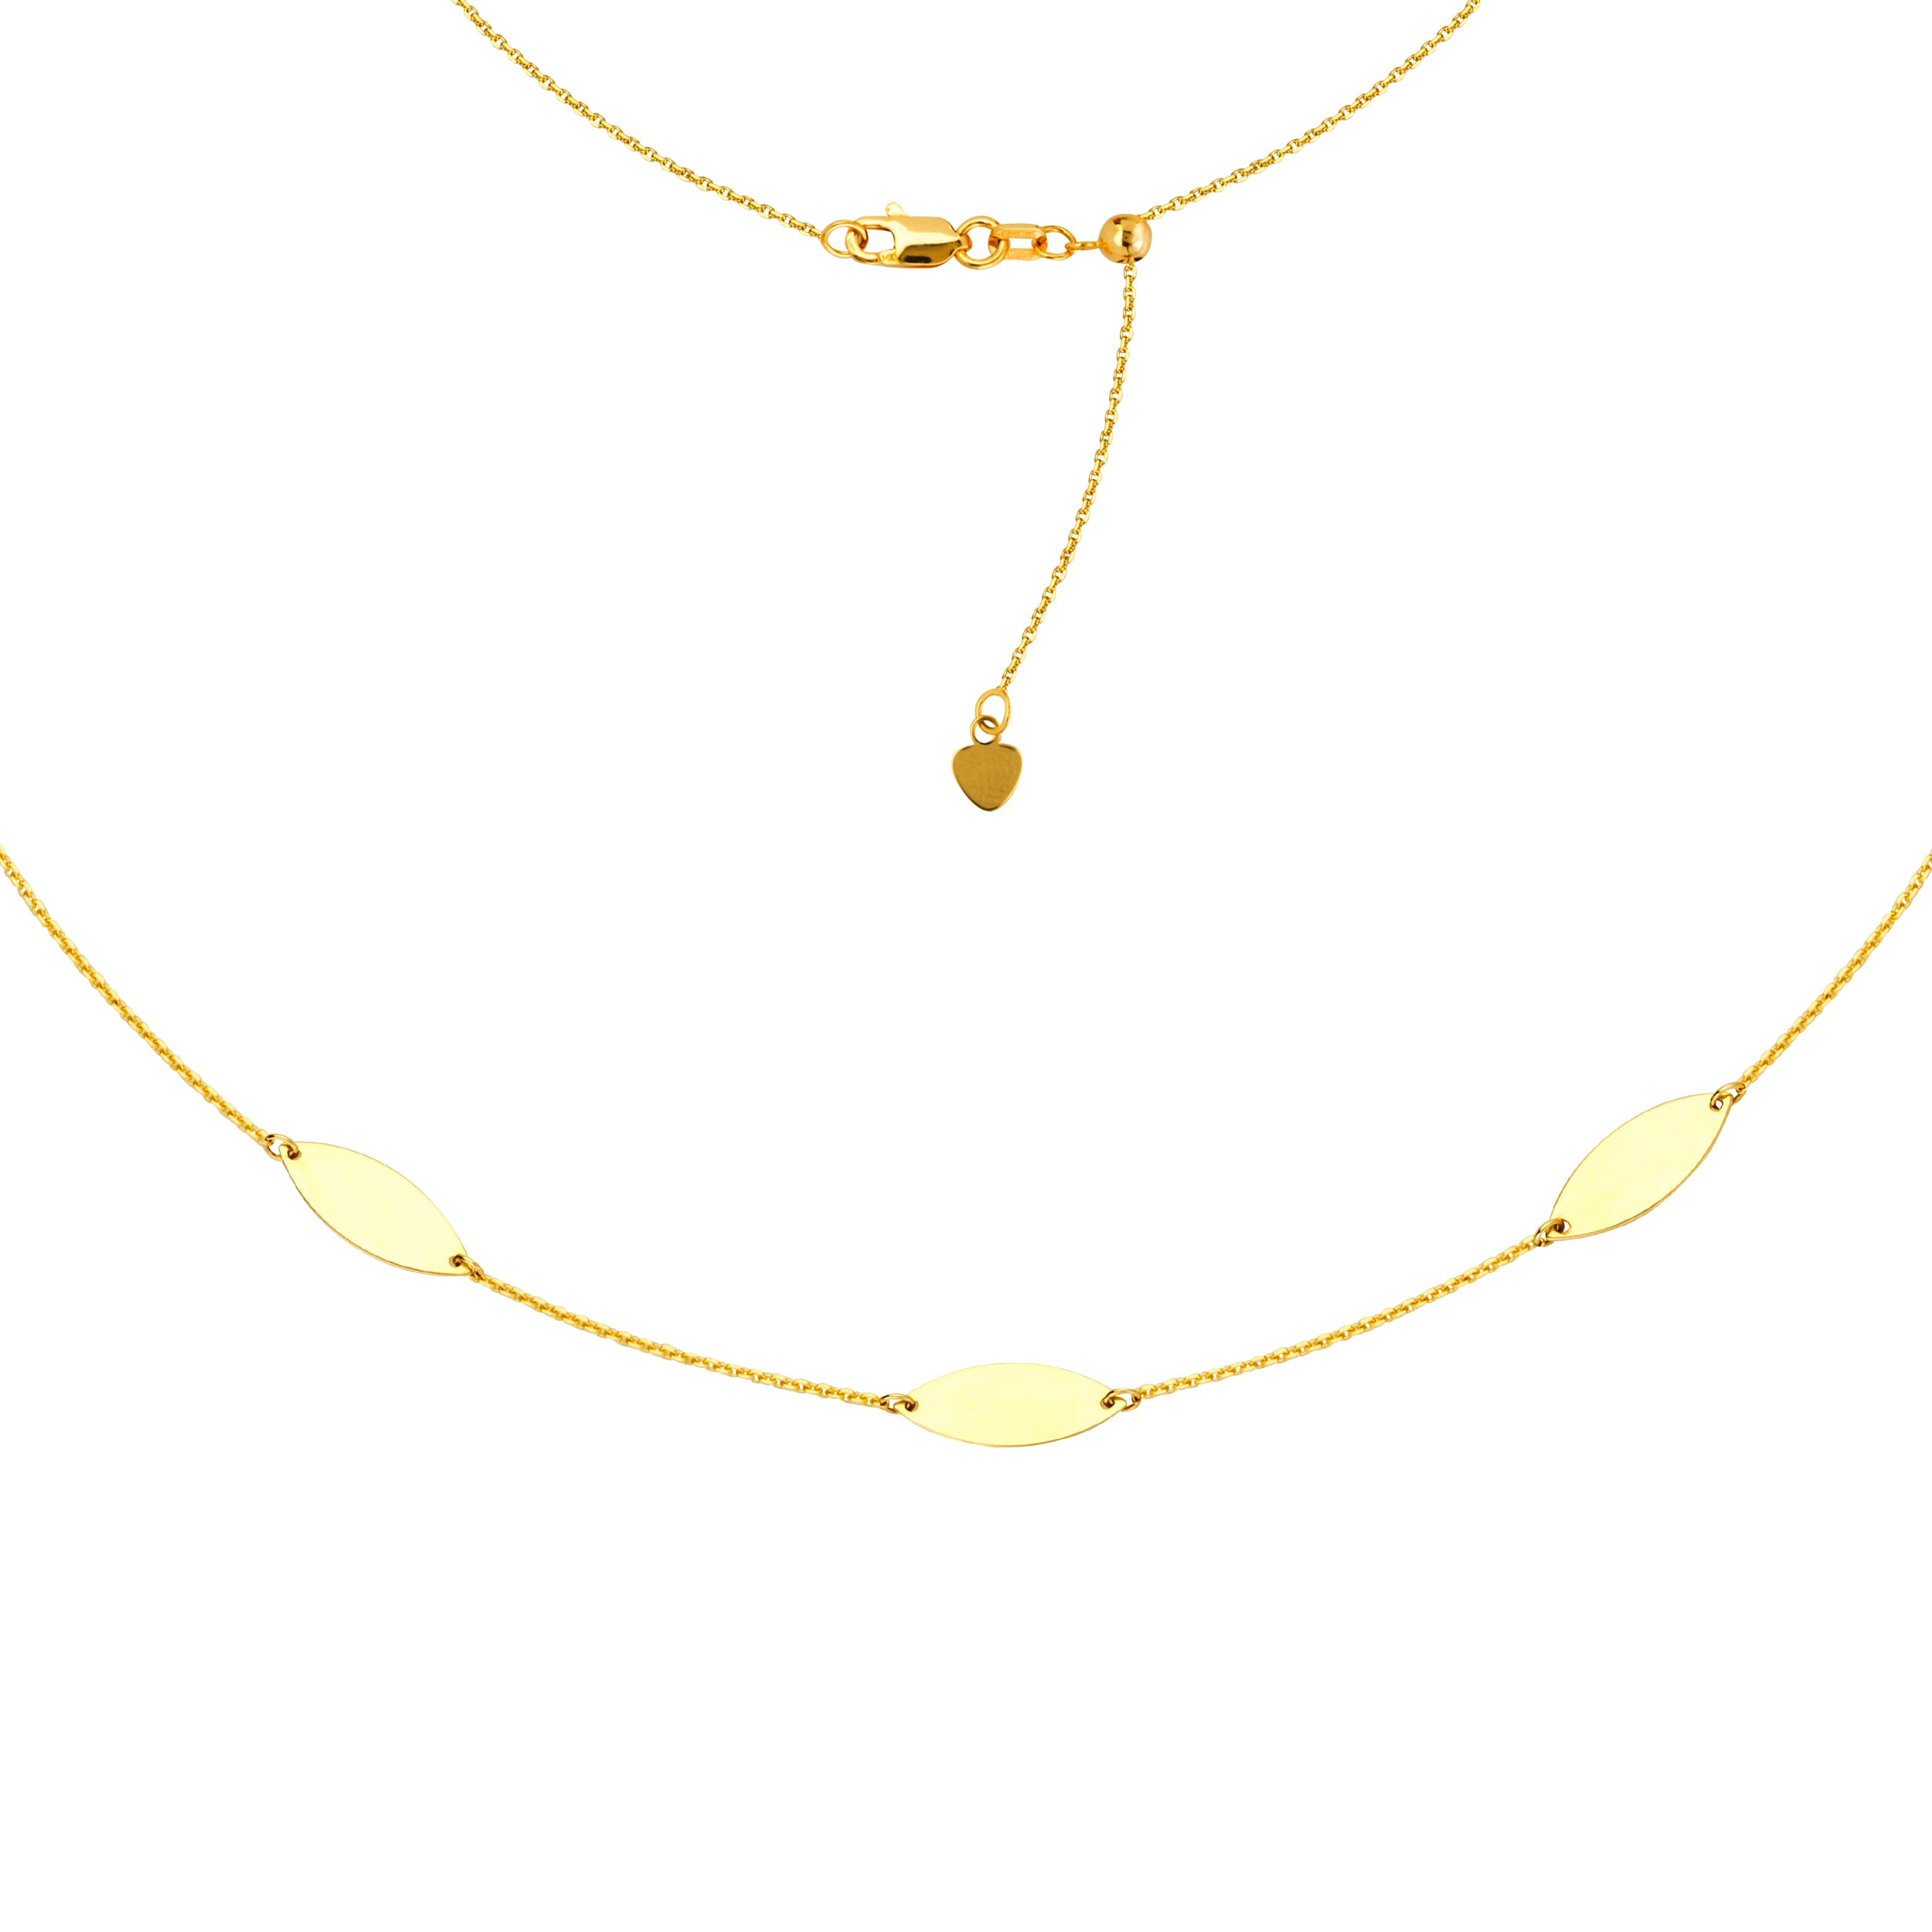 Marquise Trio Choker 14k Yellow Gold Necklace, 16" Adjustable